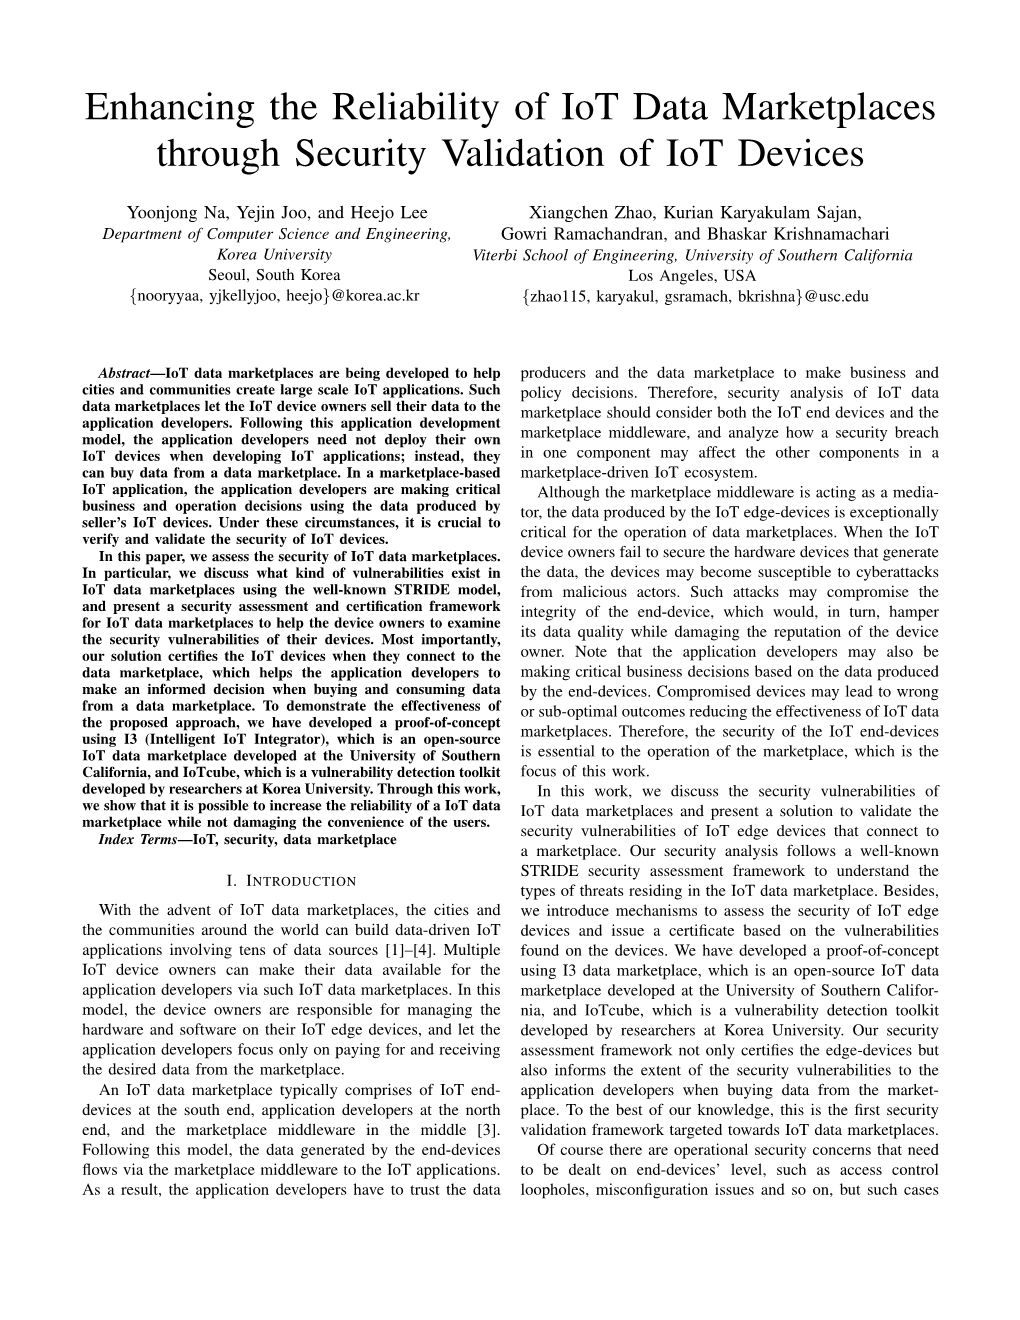 Enhancing the Reliability of Iot Data Marketplaces Through Security Validation of Iot Devices